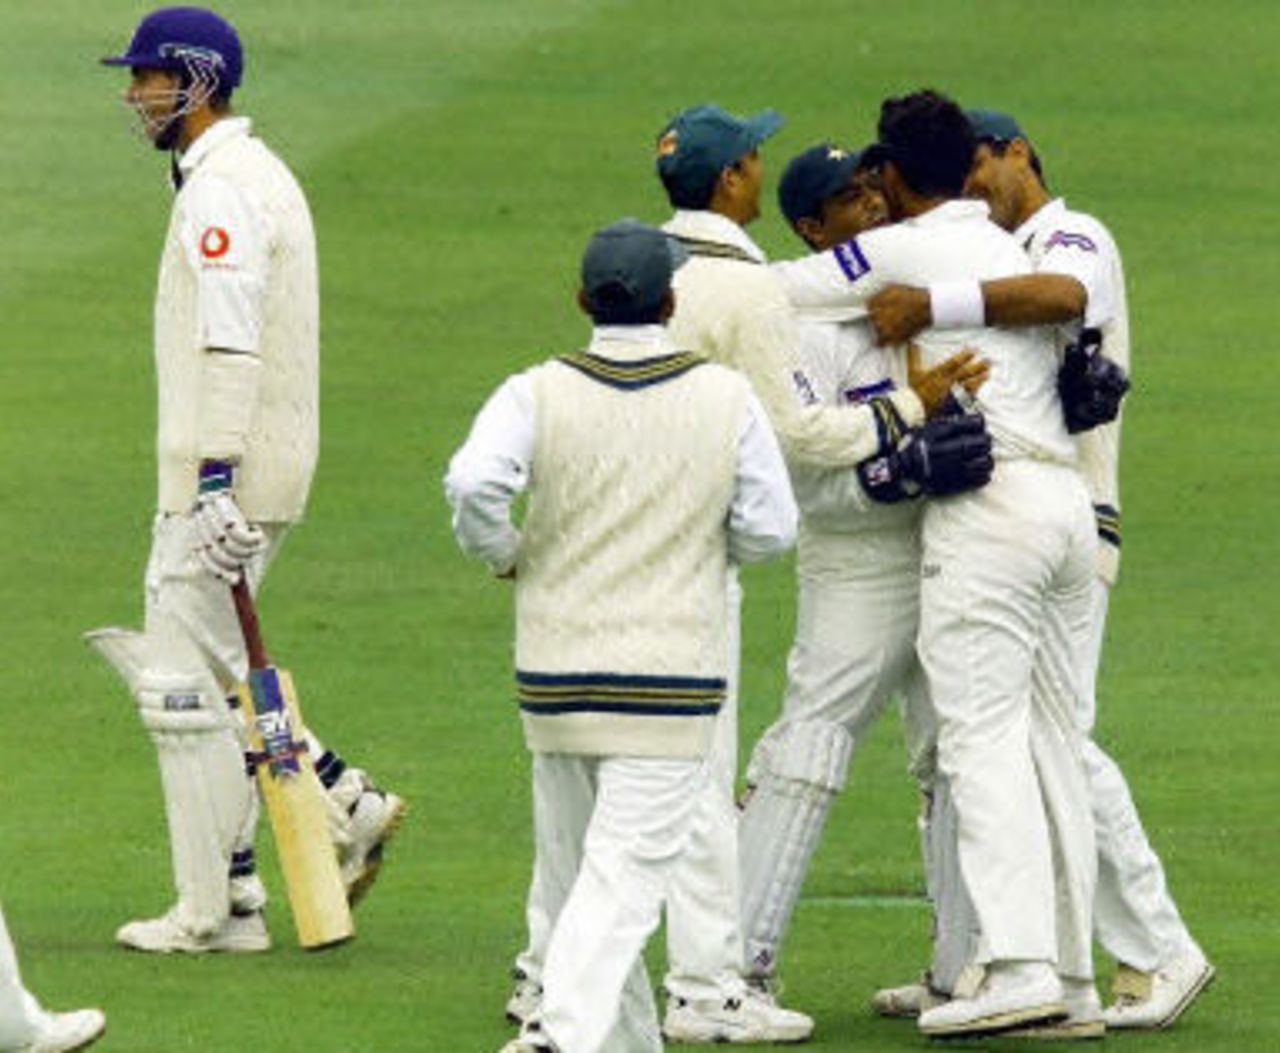 Rashid Latif hugs Azhar after Vaughan is caught behind, day 2, 1st Test at Lord's, 17-21 May 2001.